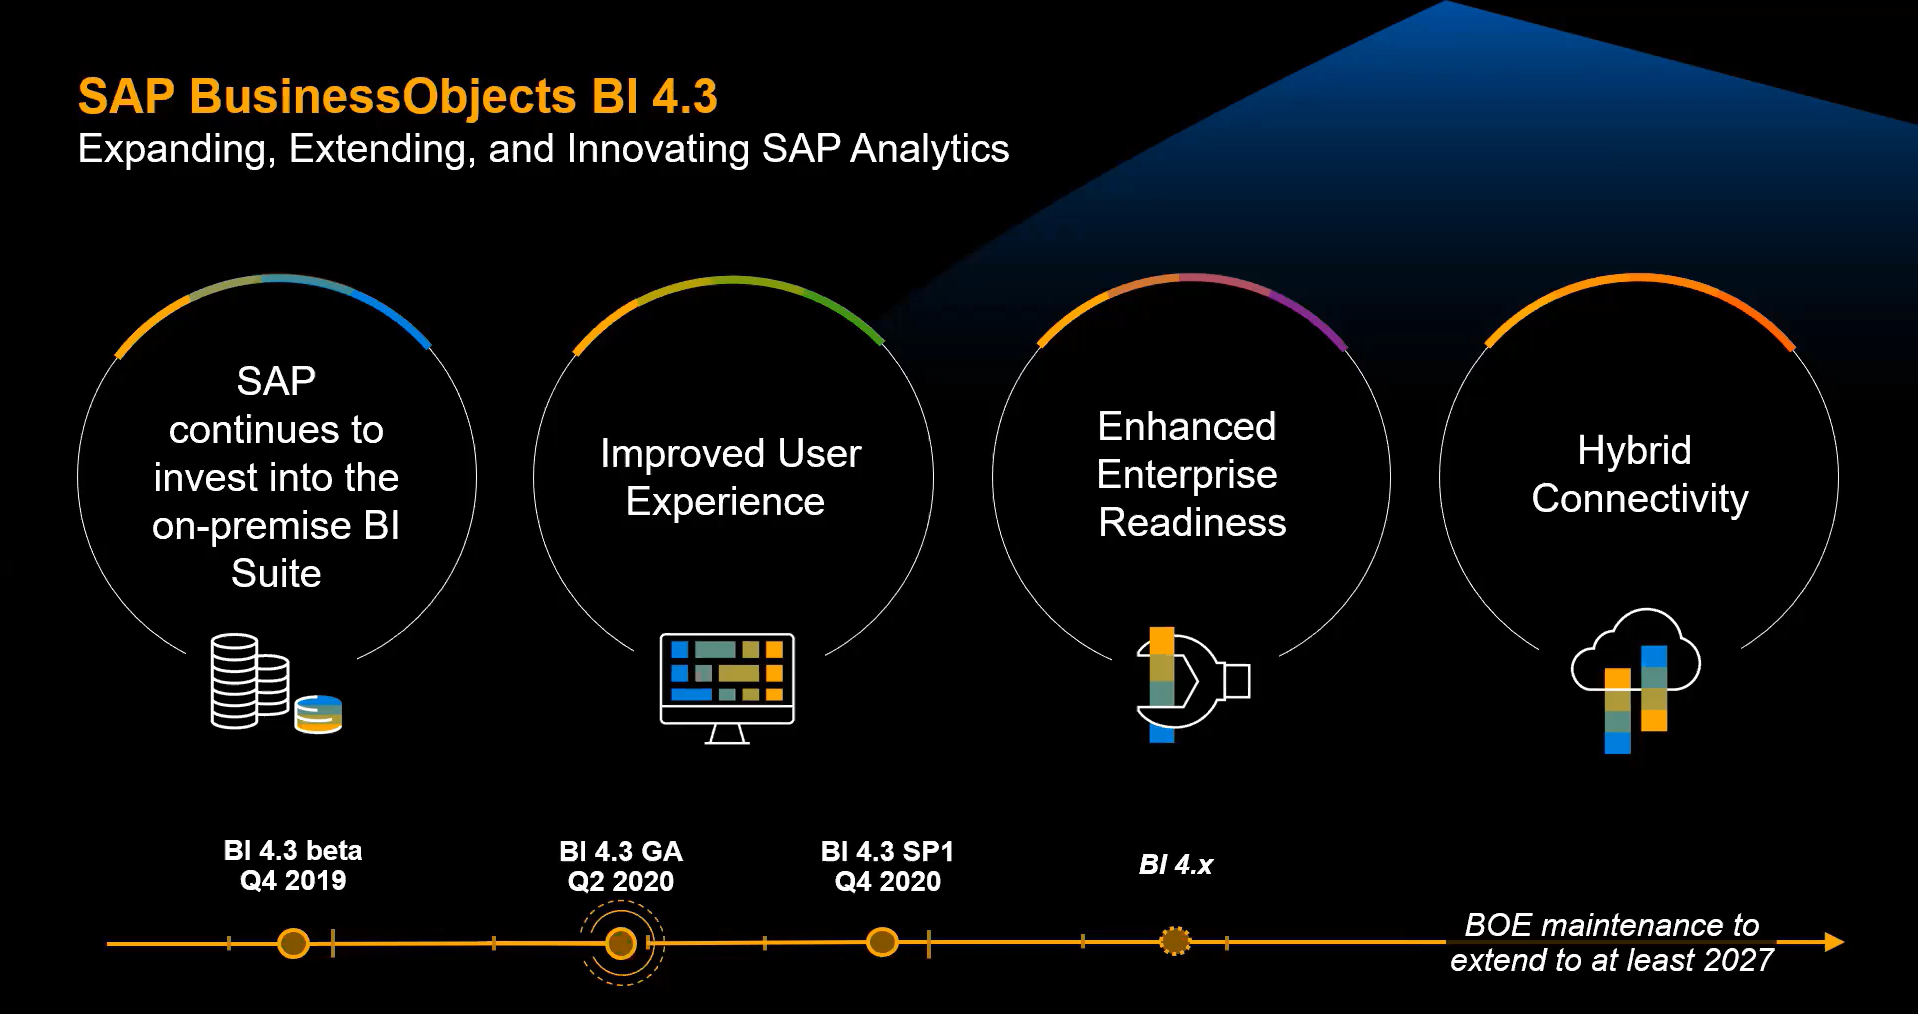 SAP BusinessObjects in action